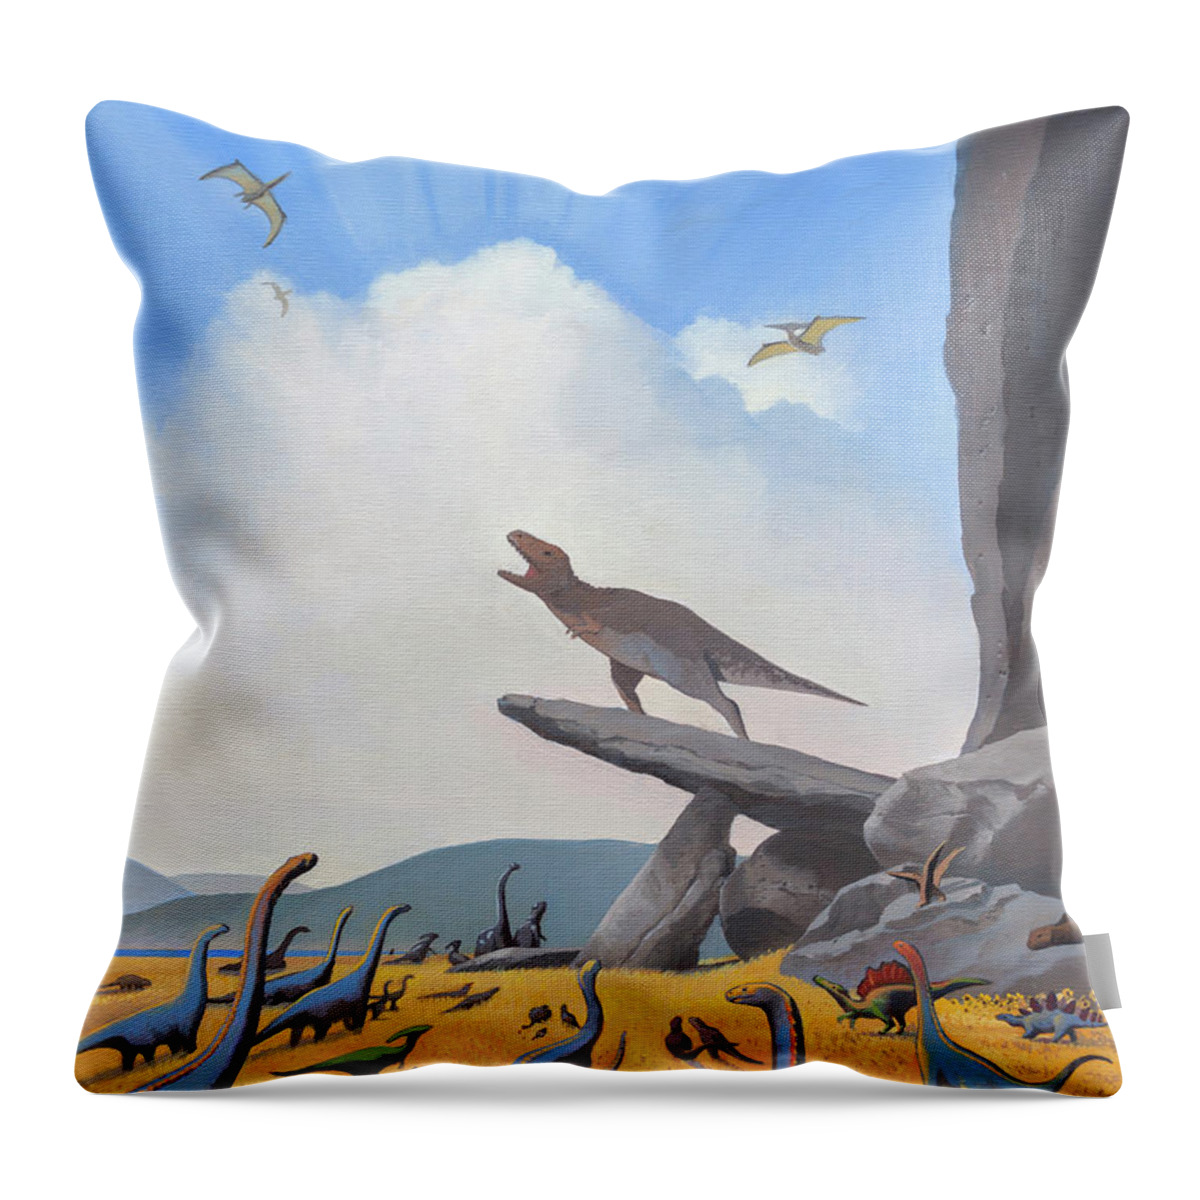 Dinosaurs Throw Pillow featuring the painting The Dino King by Cliff Wassmann